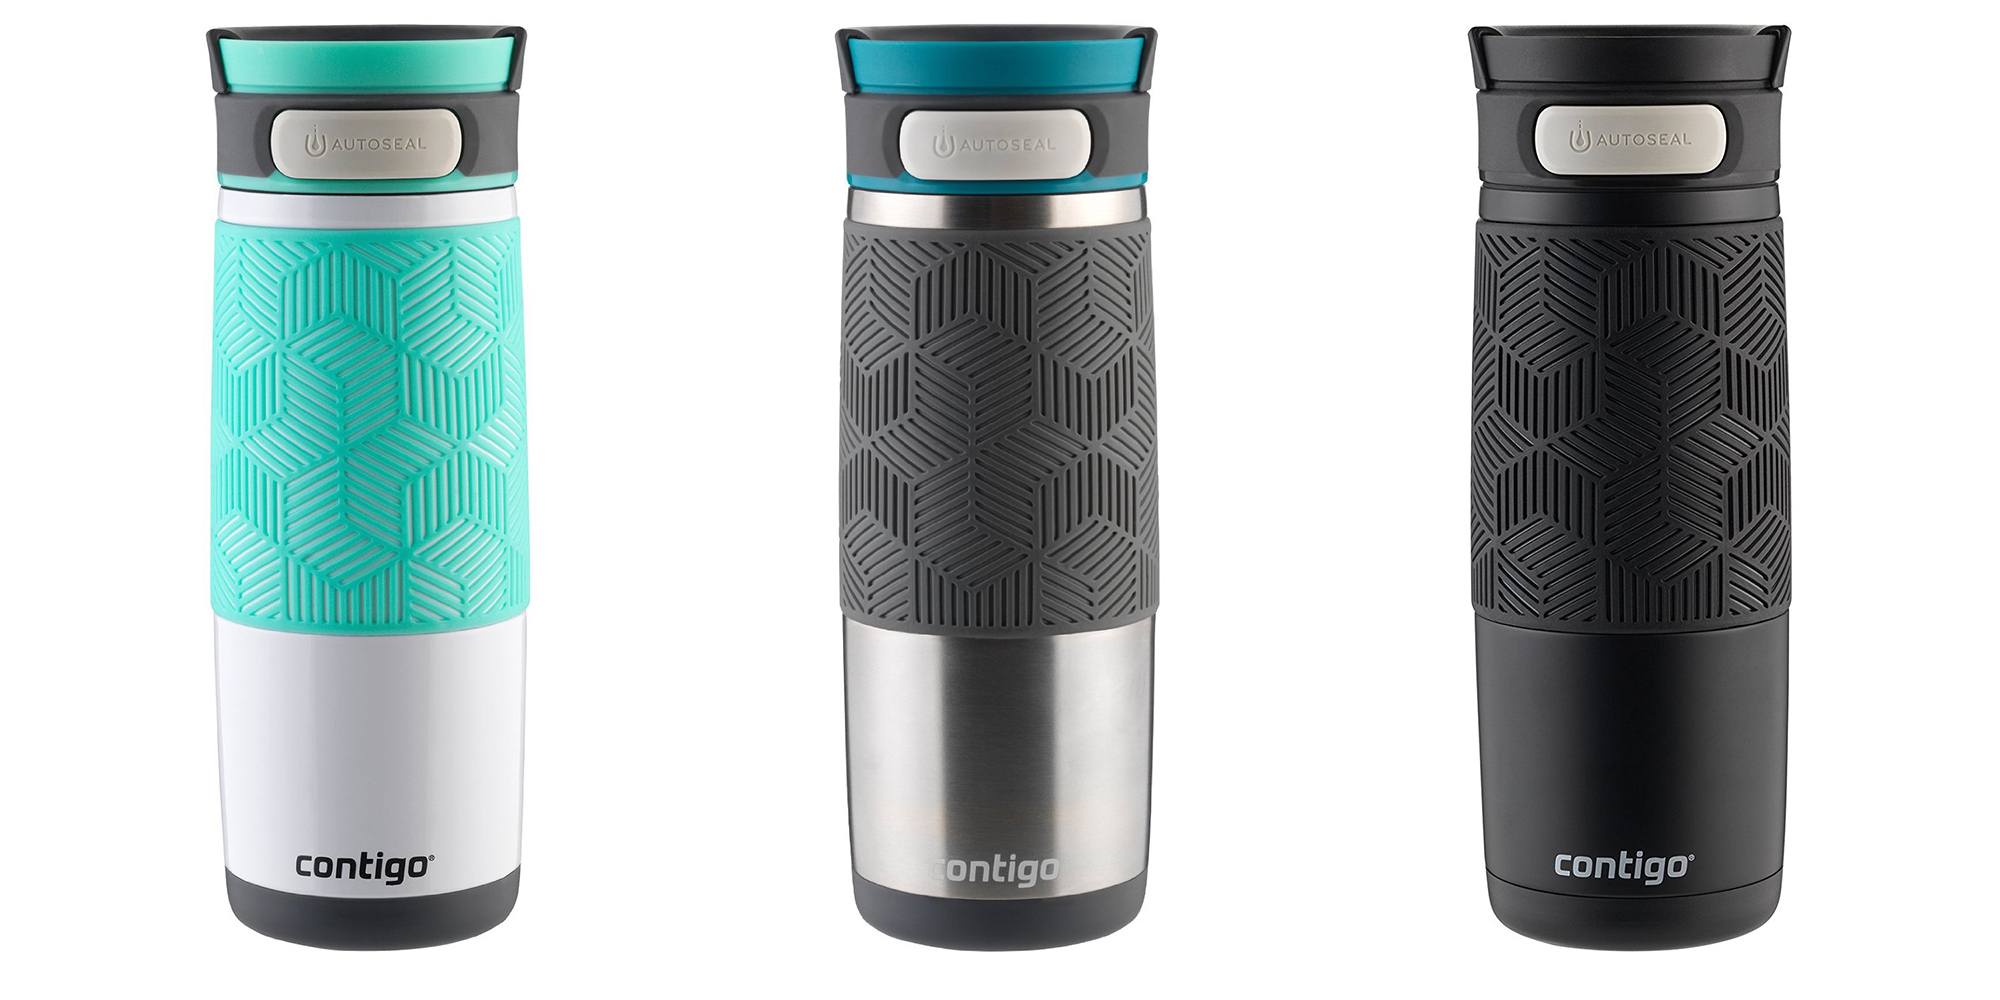 Grab a brand new Contigo water bottle from just $12 Prime shipped: Ashland  Chill Stainless Steel $15, more